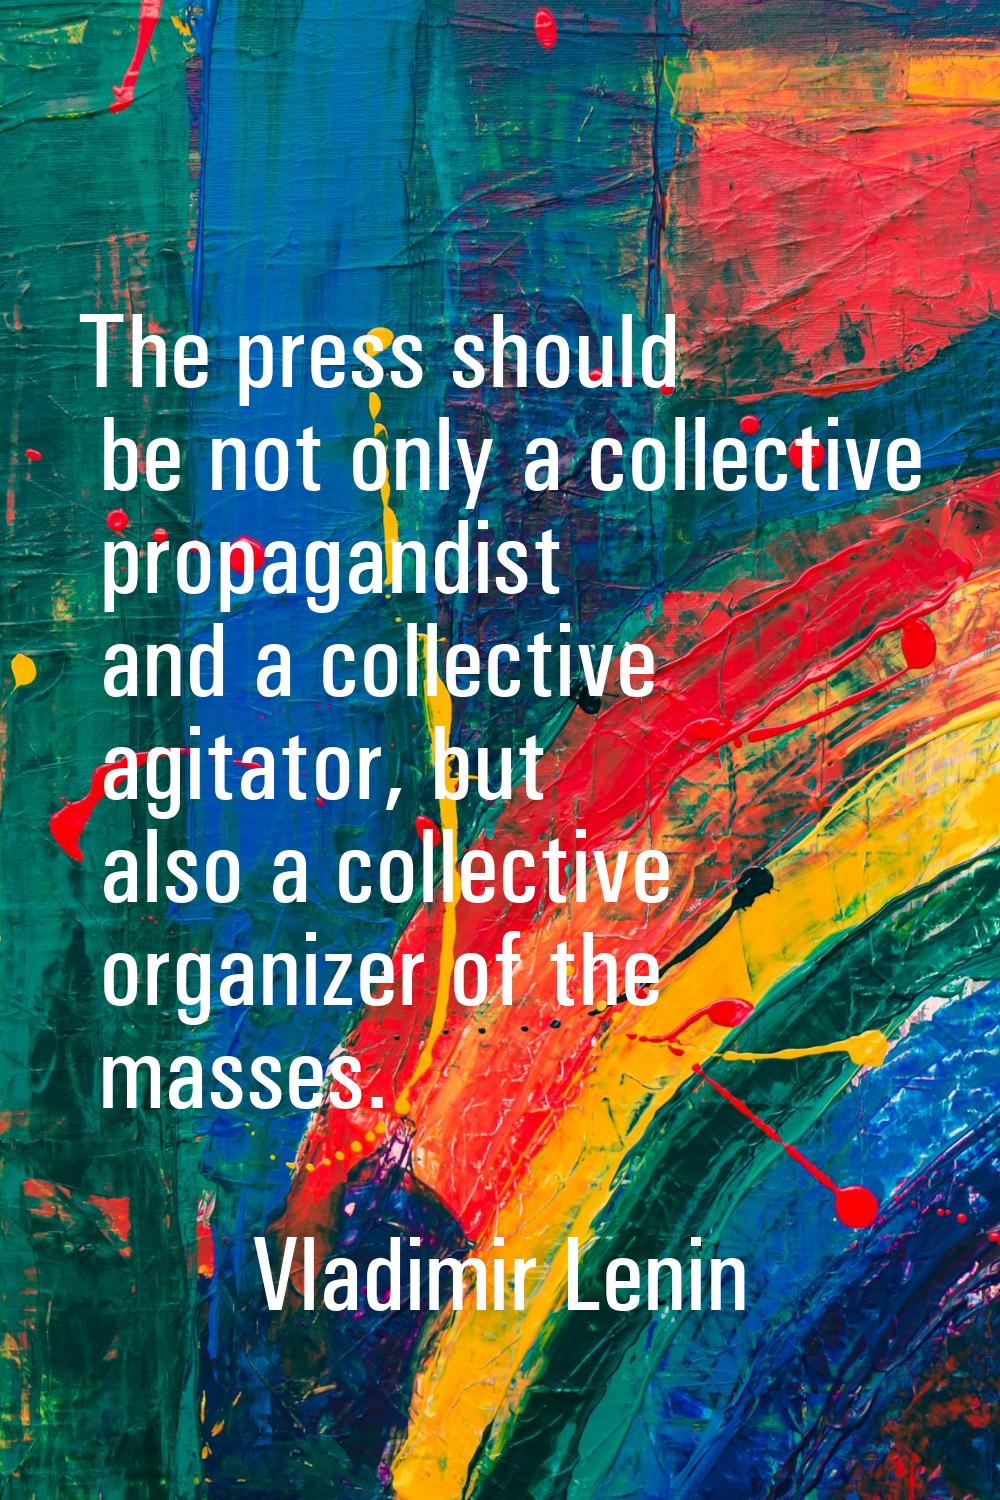 The press should be not only a collective propagandist and a collective agitator, but also a collec